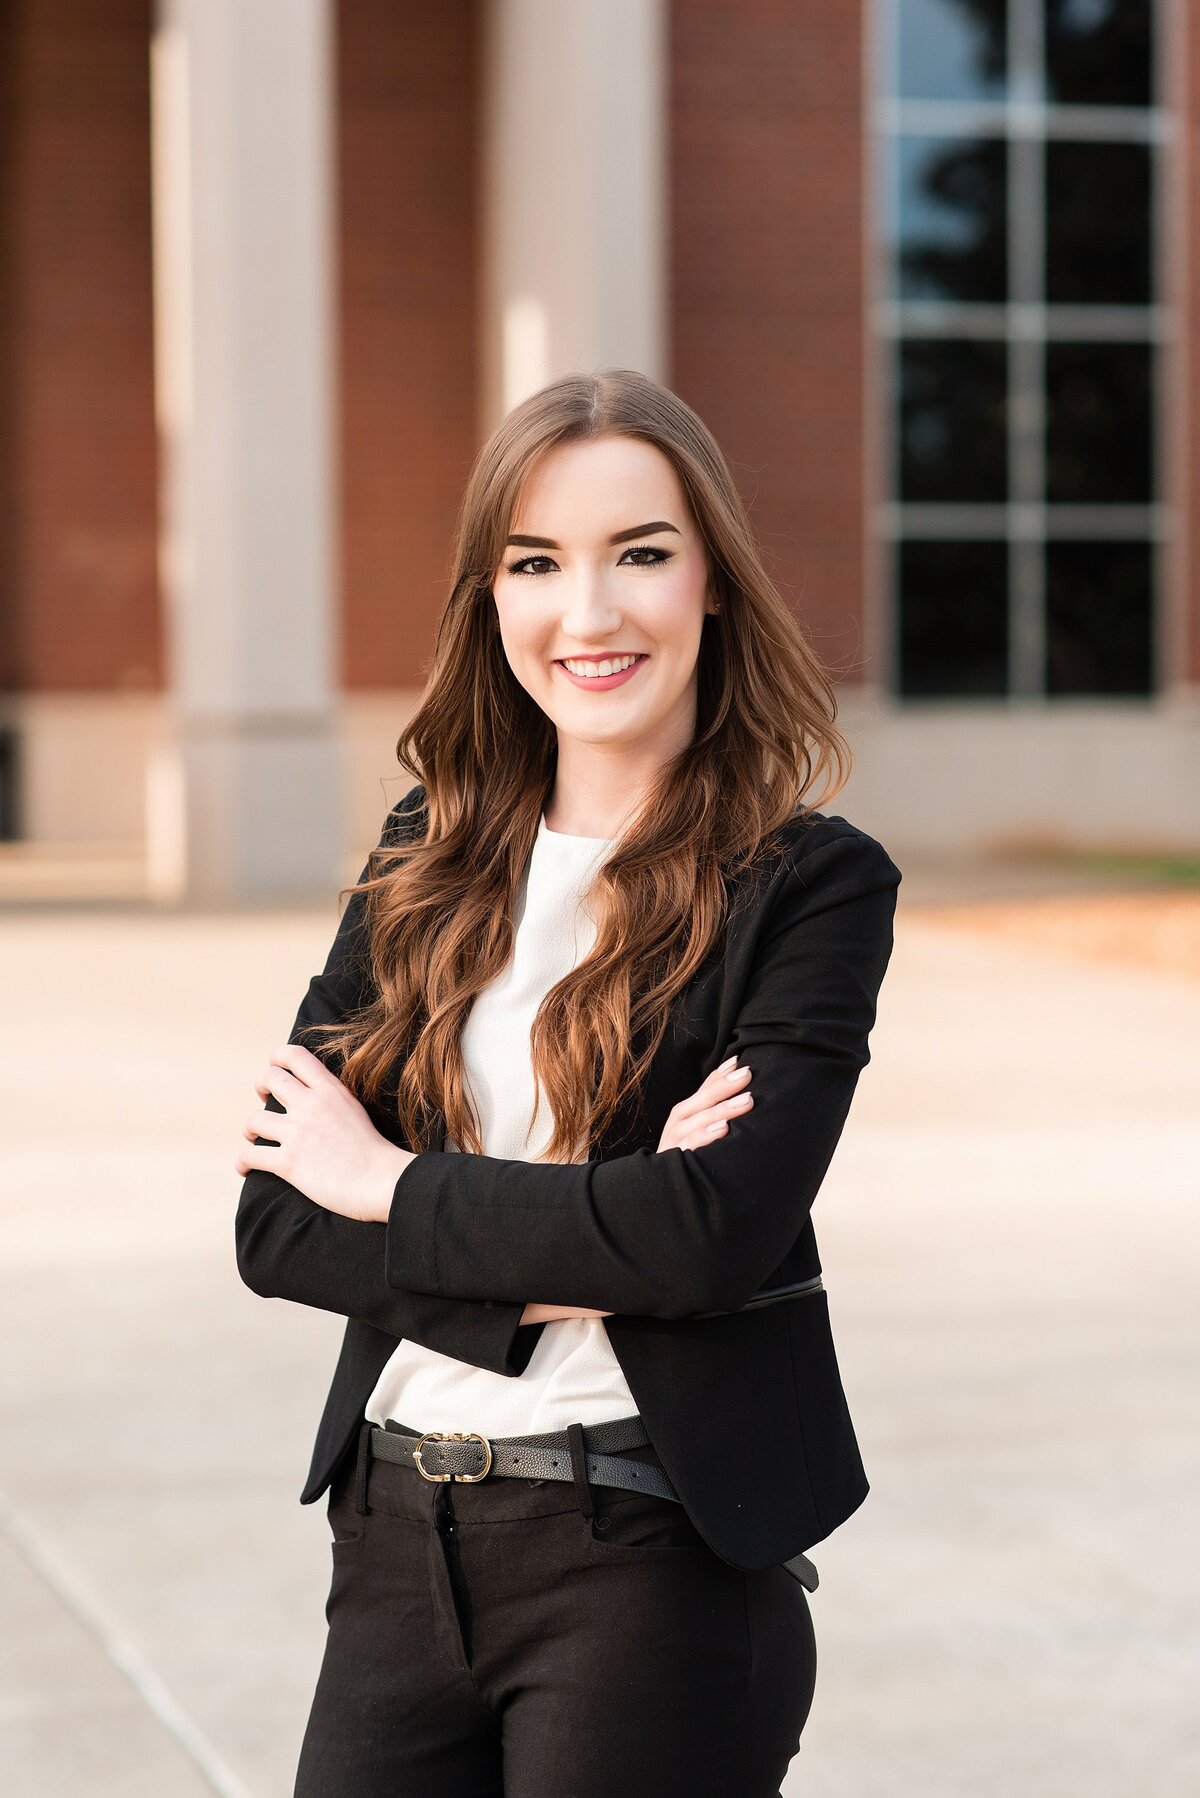 College Senior headshot for LinkedIn, wearing a black power suite with cream blouse in front of Middle Tennessee State University